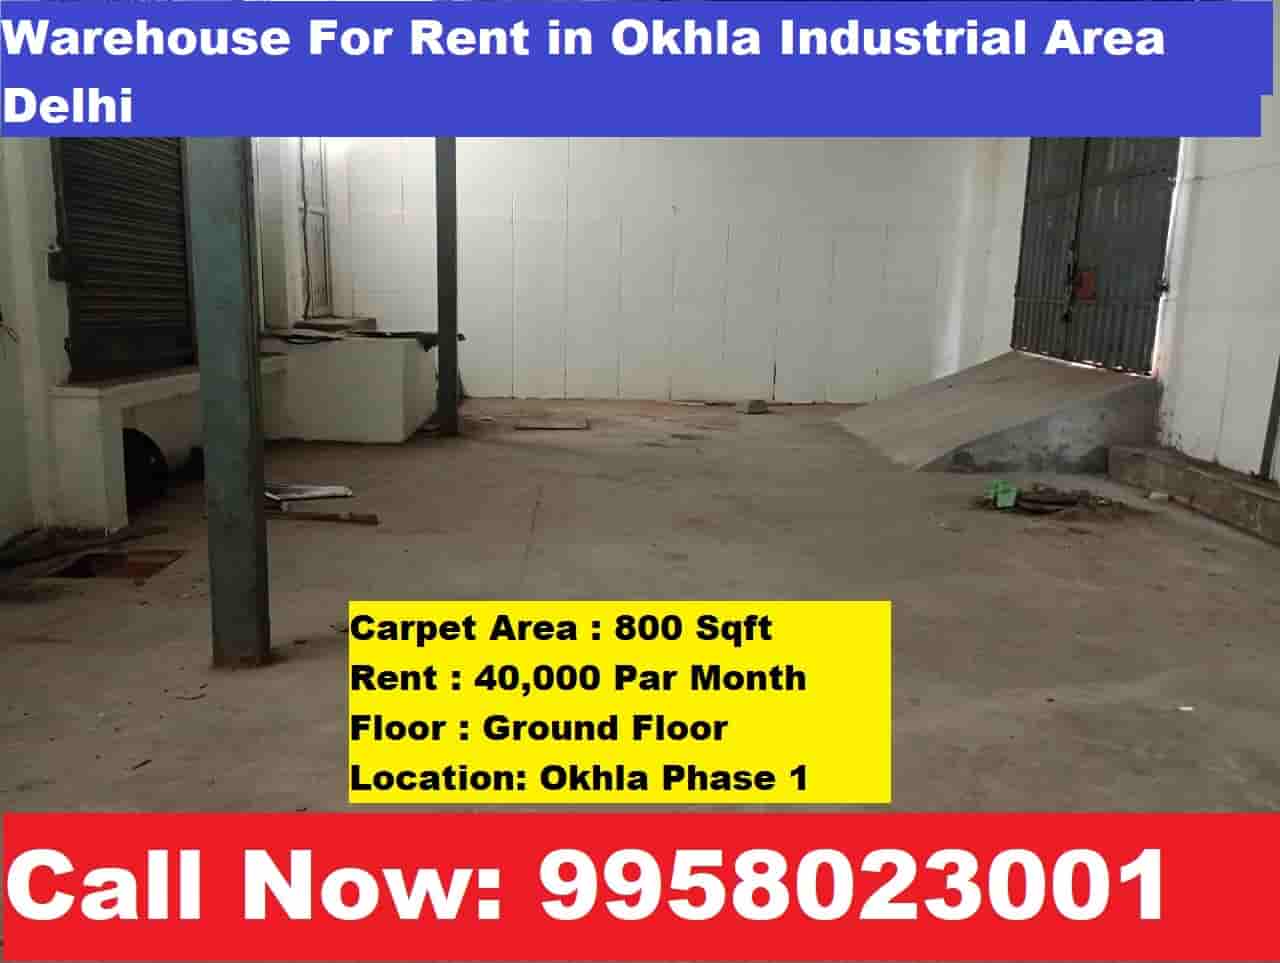 Warehouse For Rent in Okhla Industrial Area Delhi